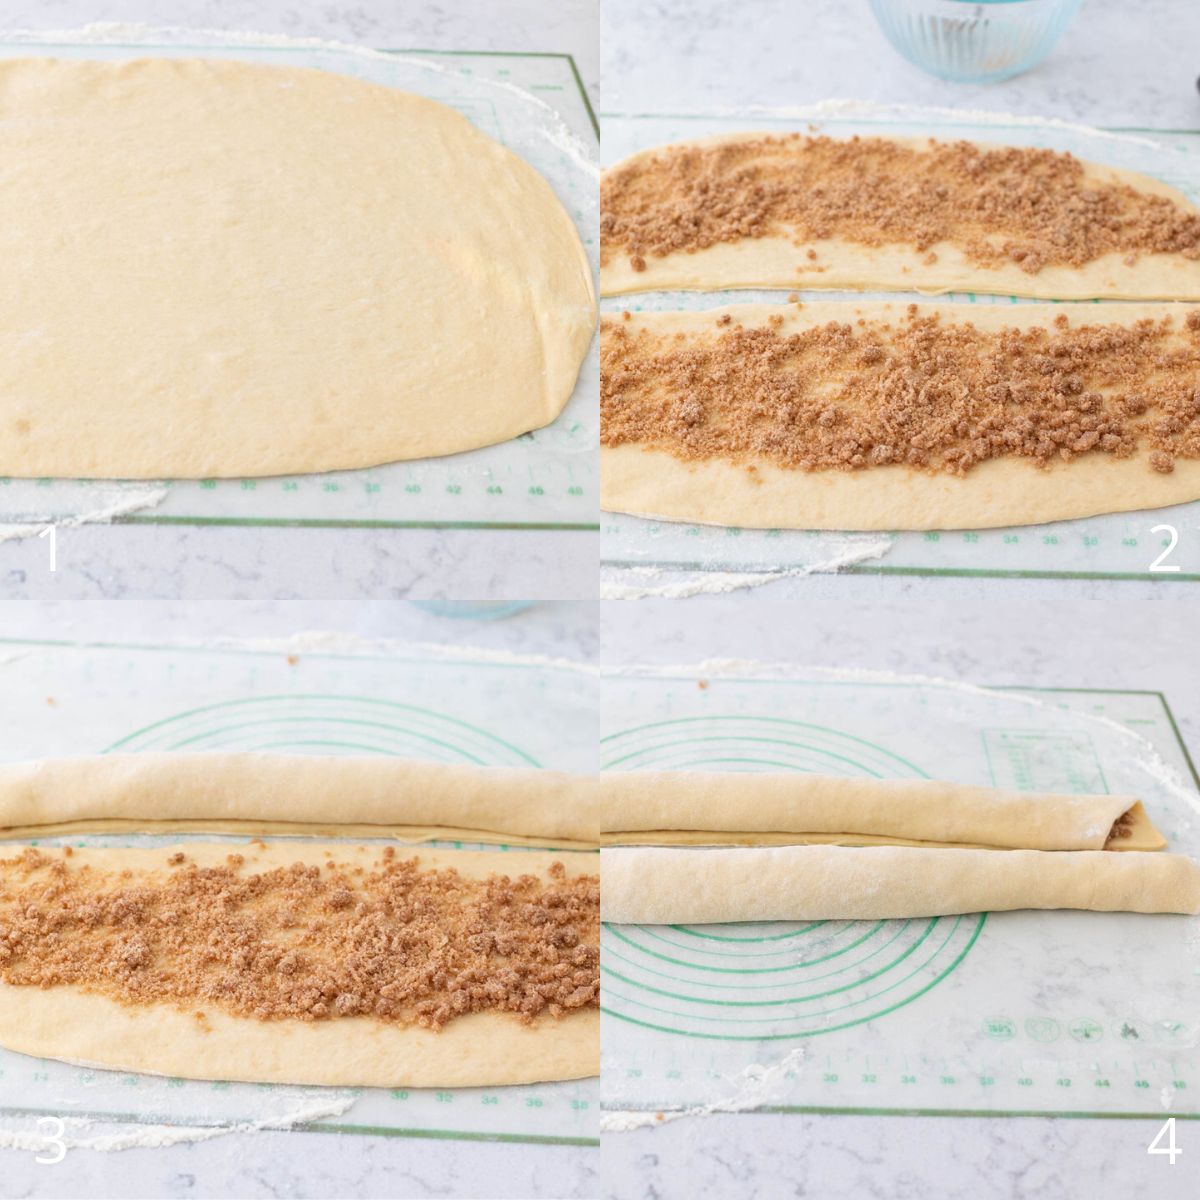 The step by step photos show how to roll the cinnamon filling into the brioche dough.